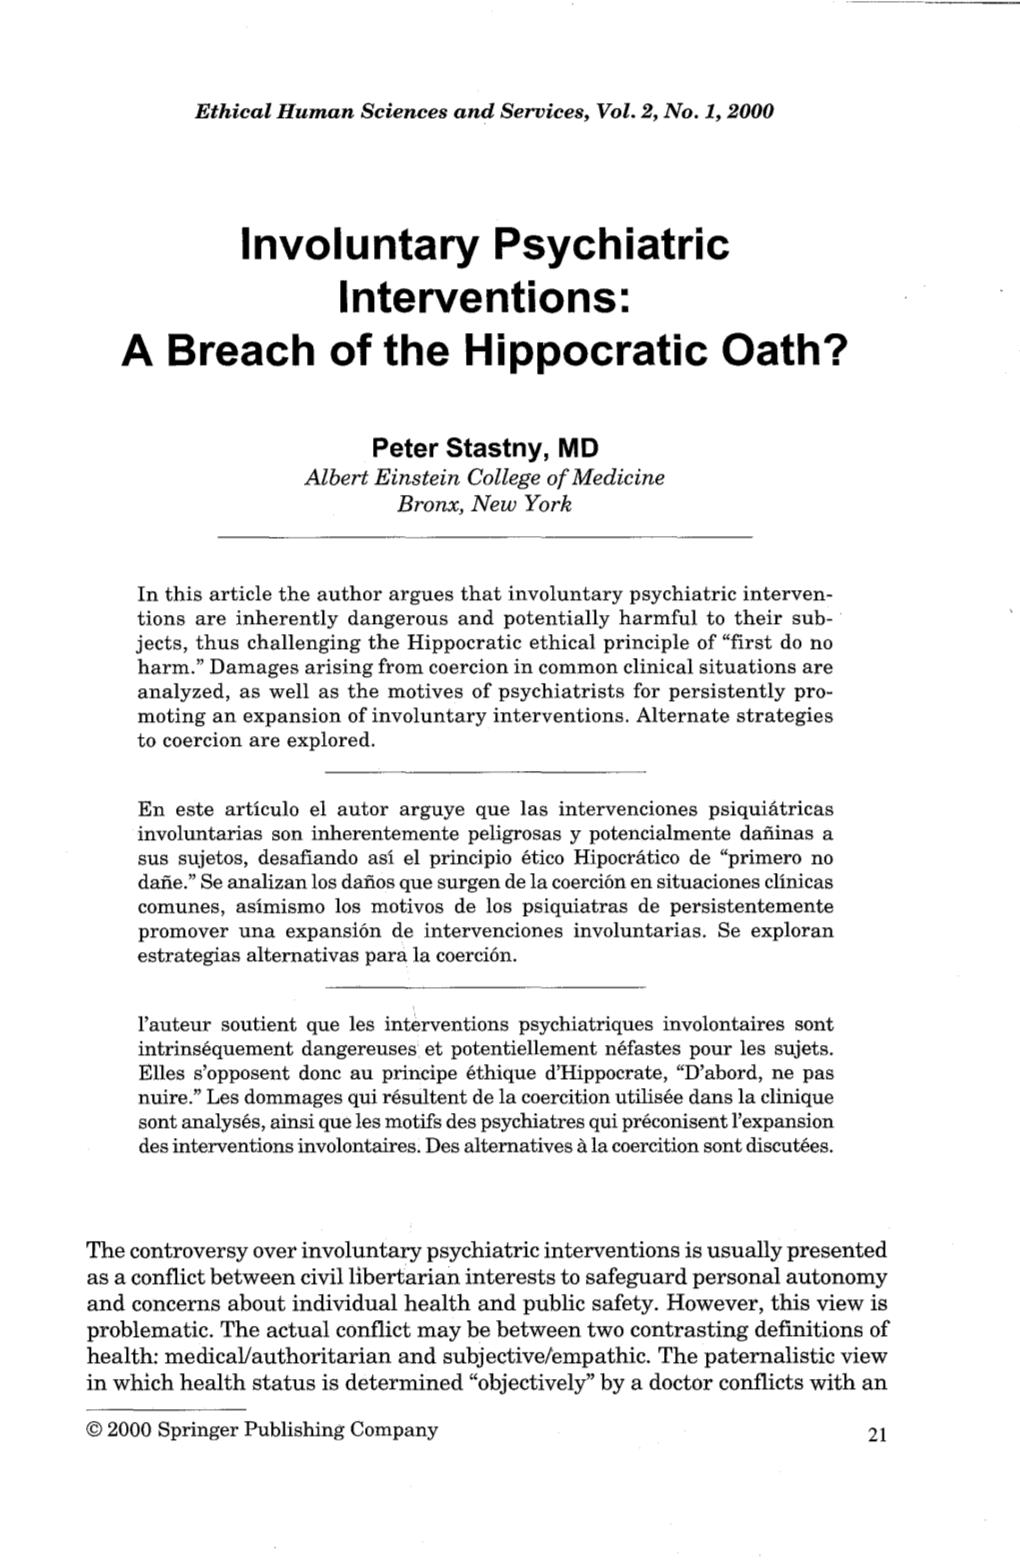 Involuntary Psychiatric Interventions: a Breach of the Hippocratic Oath?